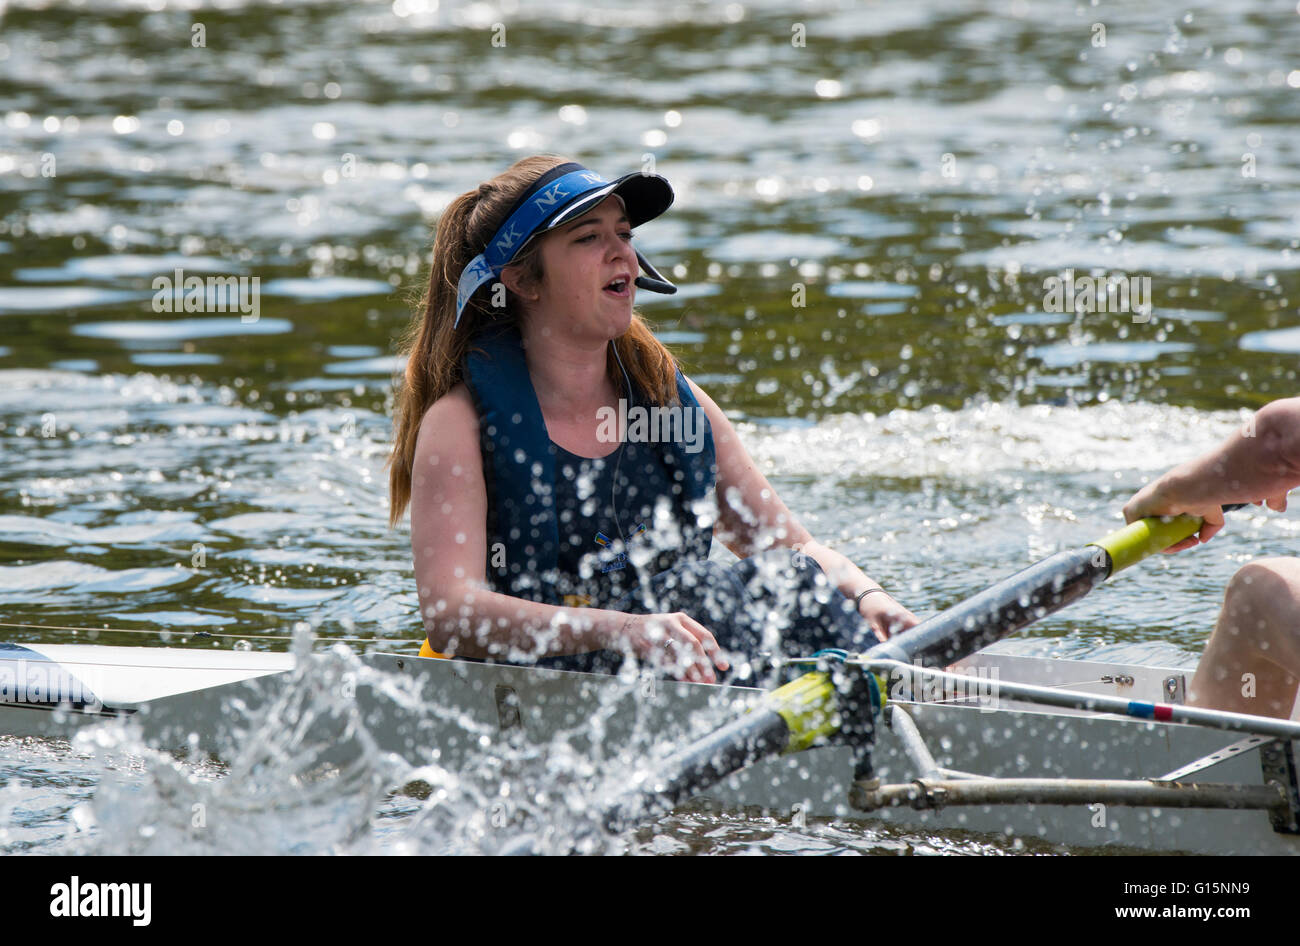 Coxswain in a rowing boat competing in Shrewsbury Regatta on the River Severn, Shropshire, England, UK. Stock Photo